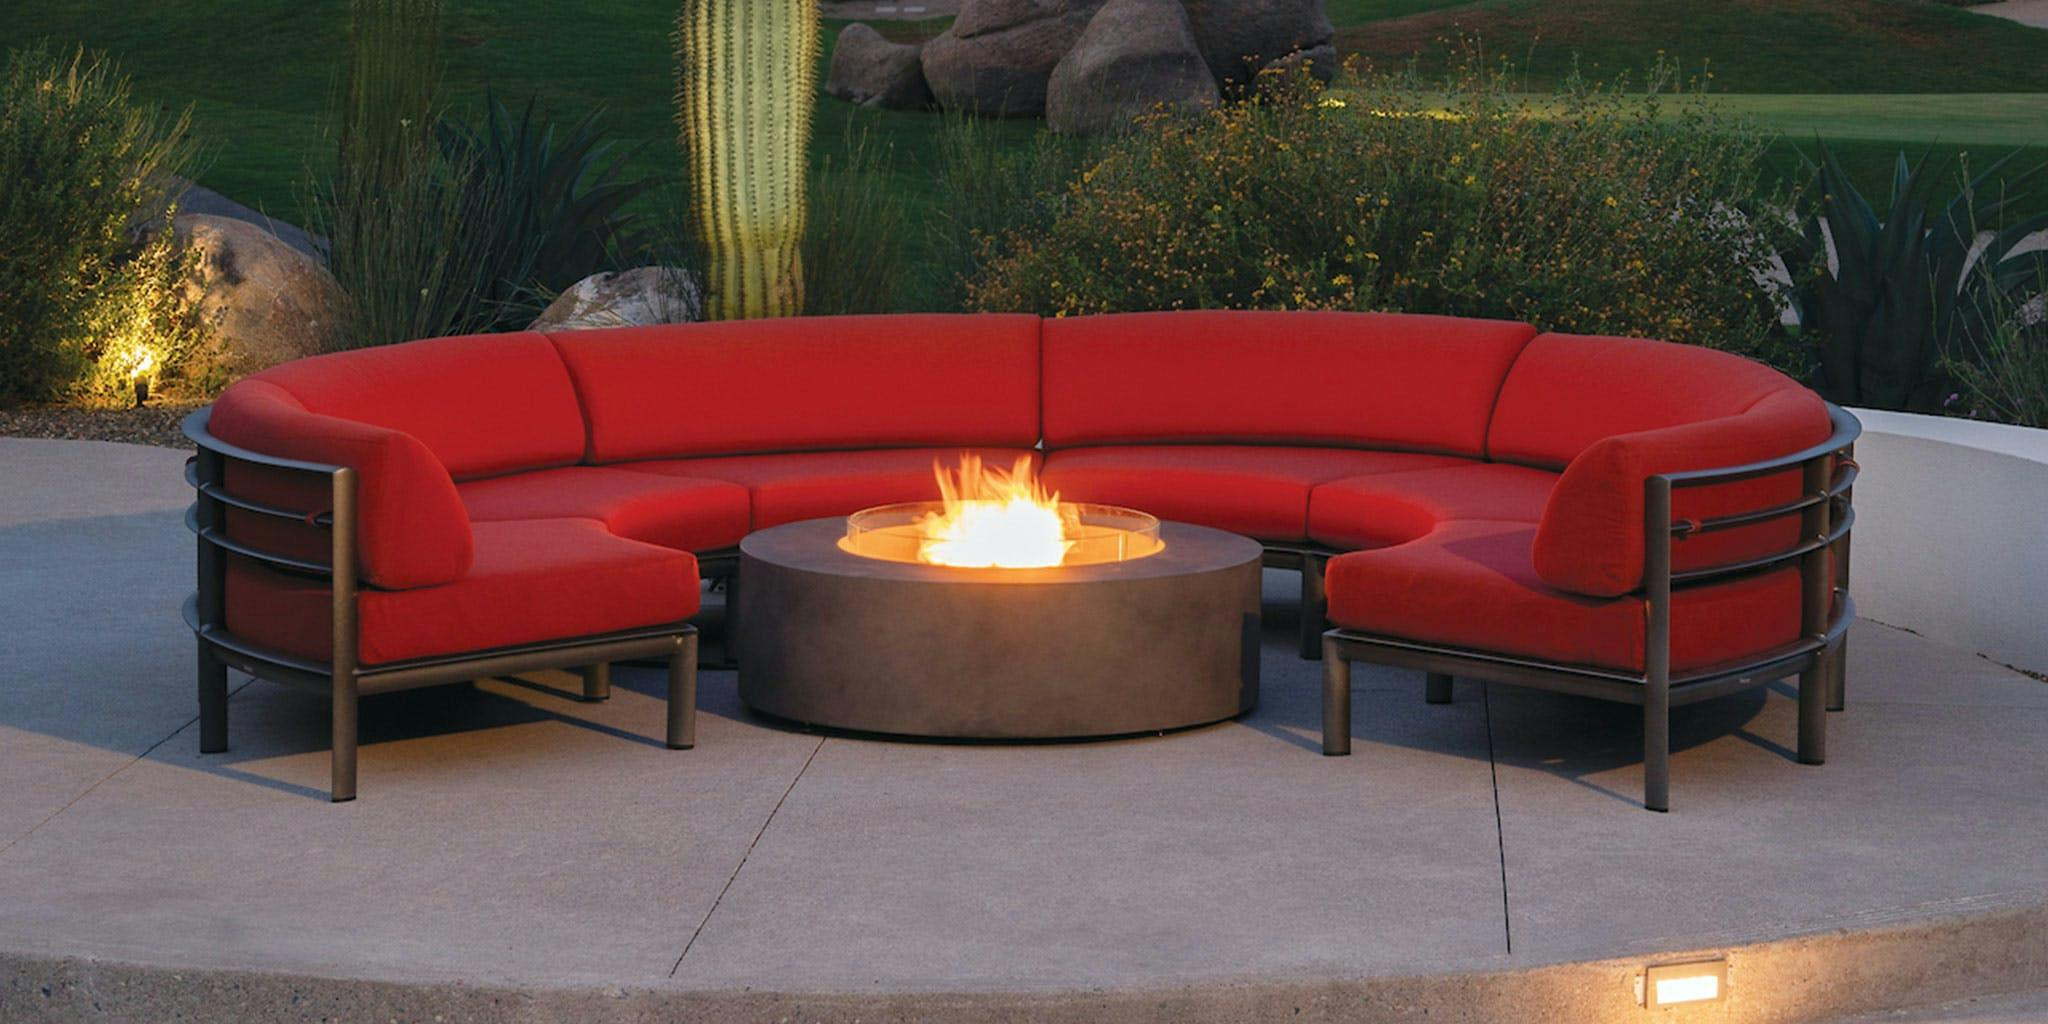 modular sofa with red cushions around a fire table